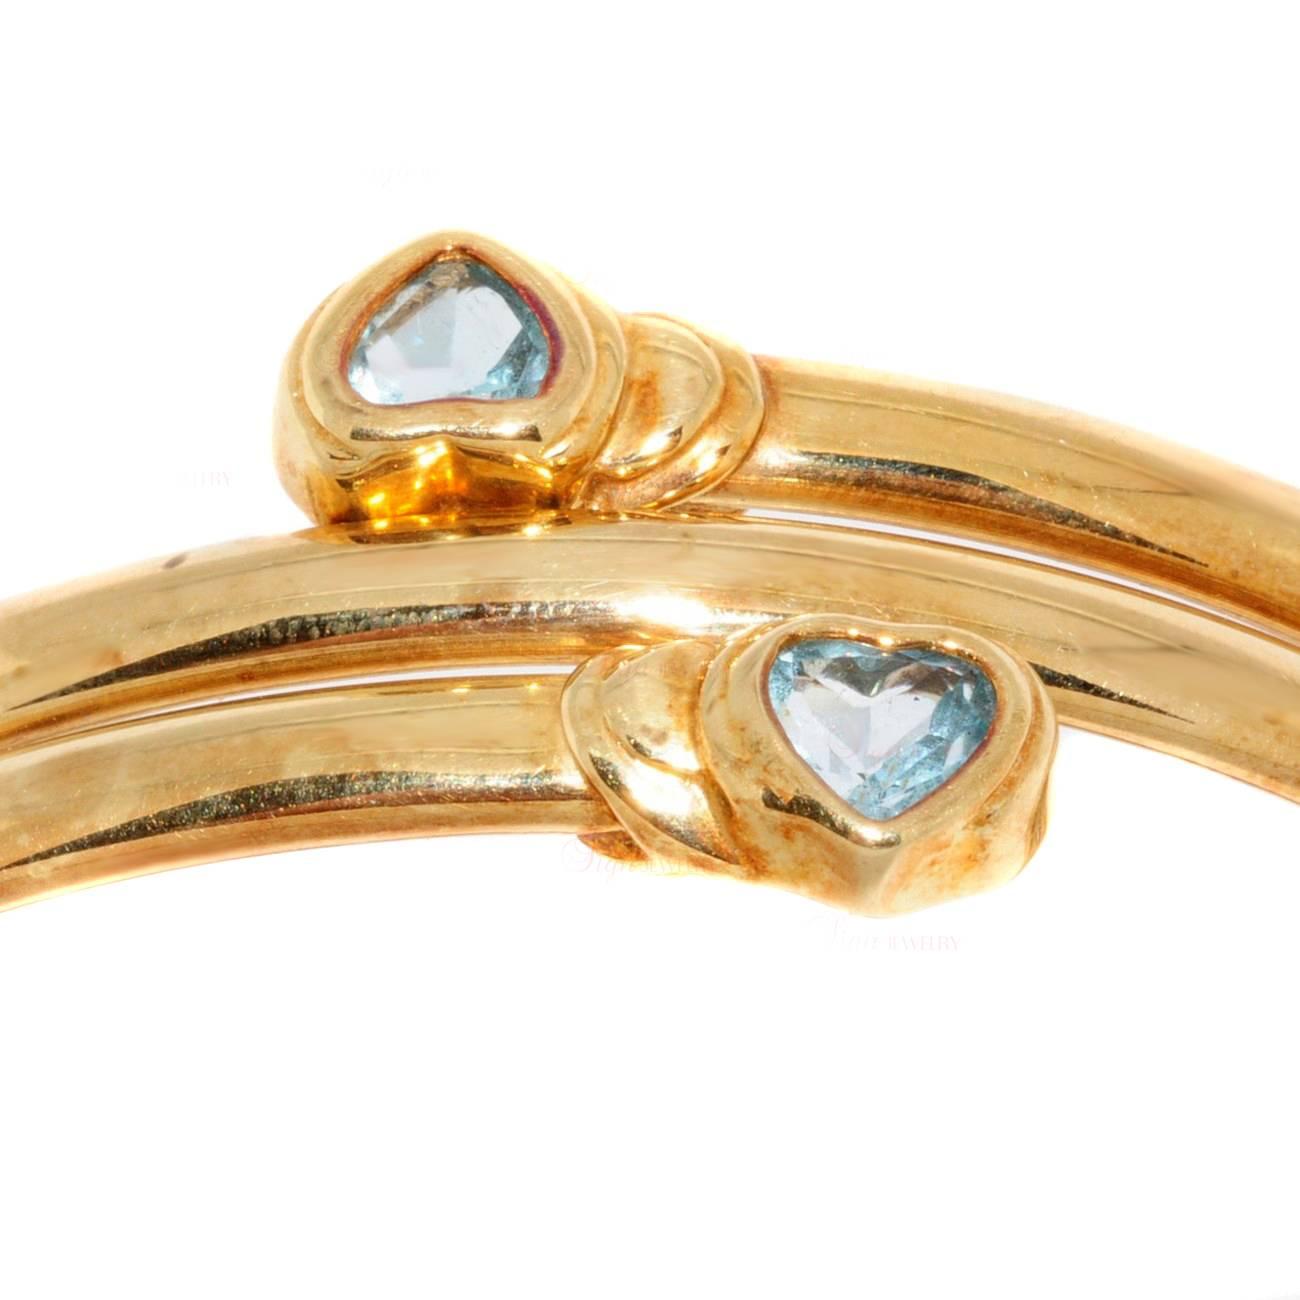 This bracelet was made in 1980s and features blue topaz hearts set in 14k yellow gold. Measurements: 6.5